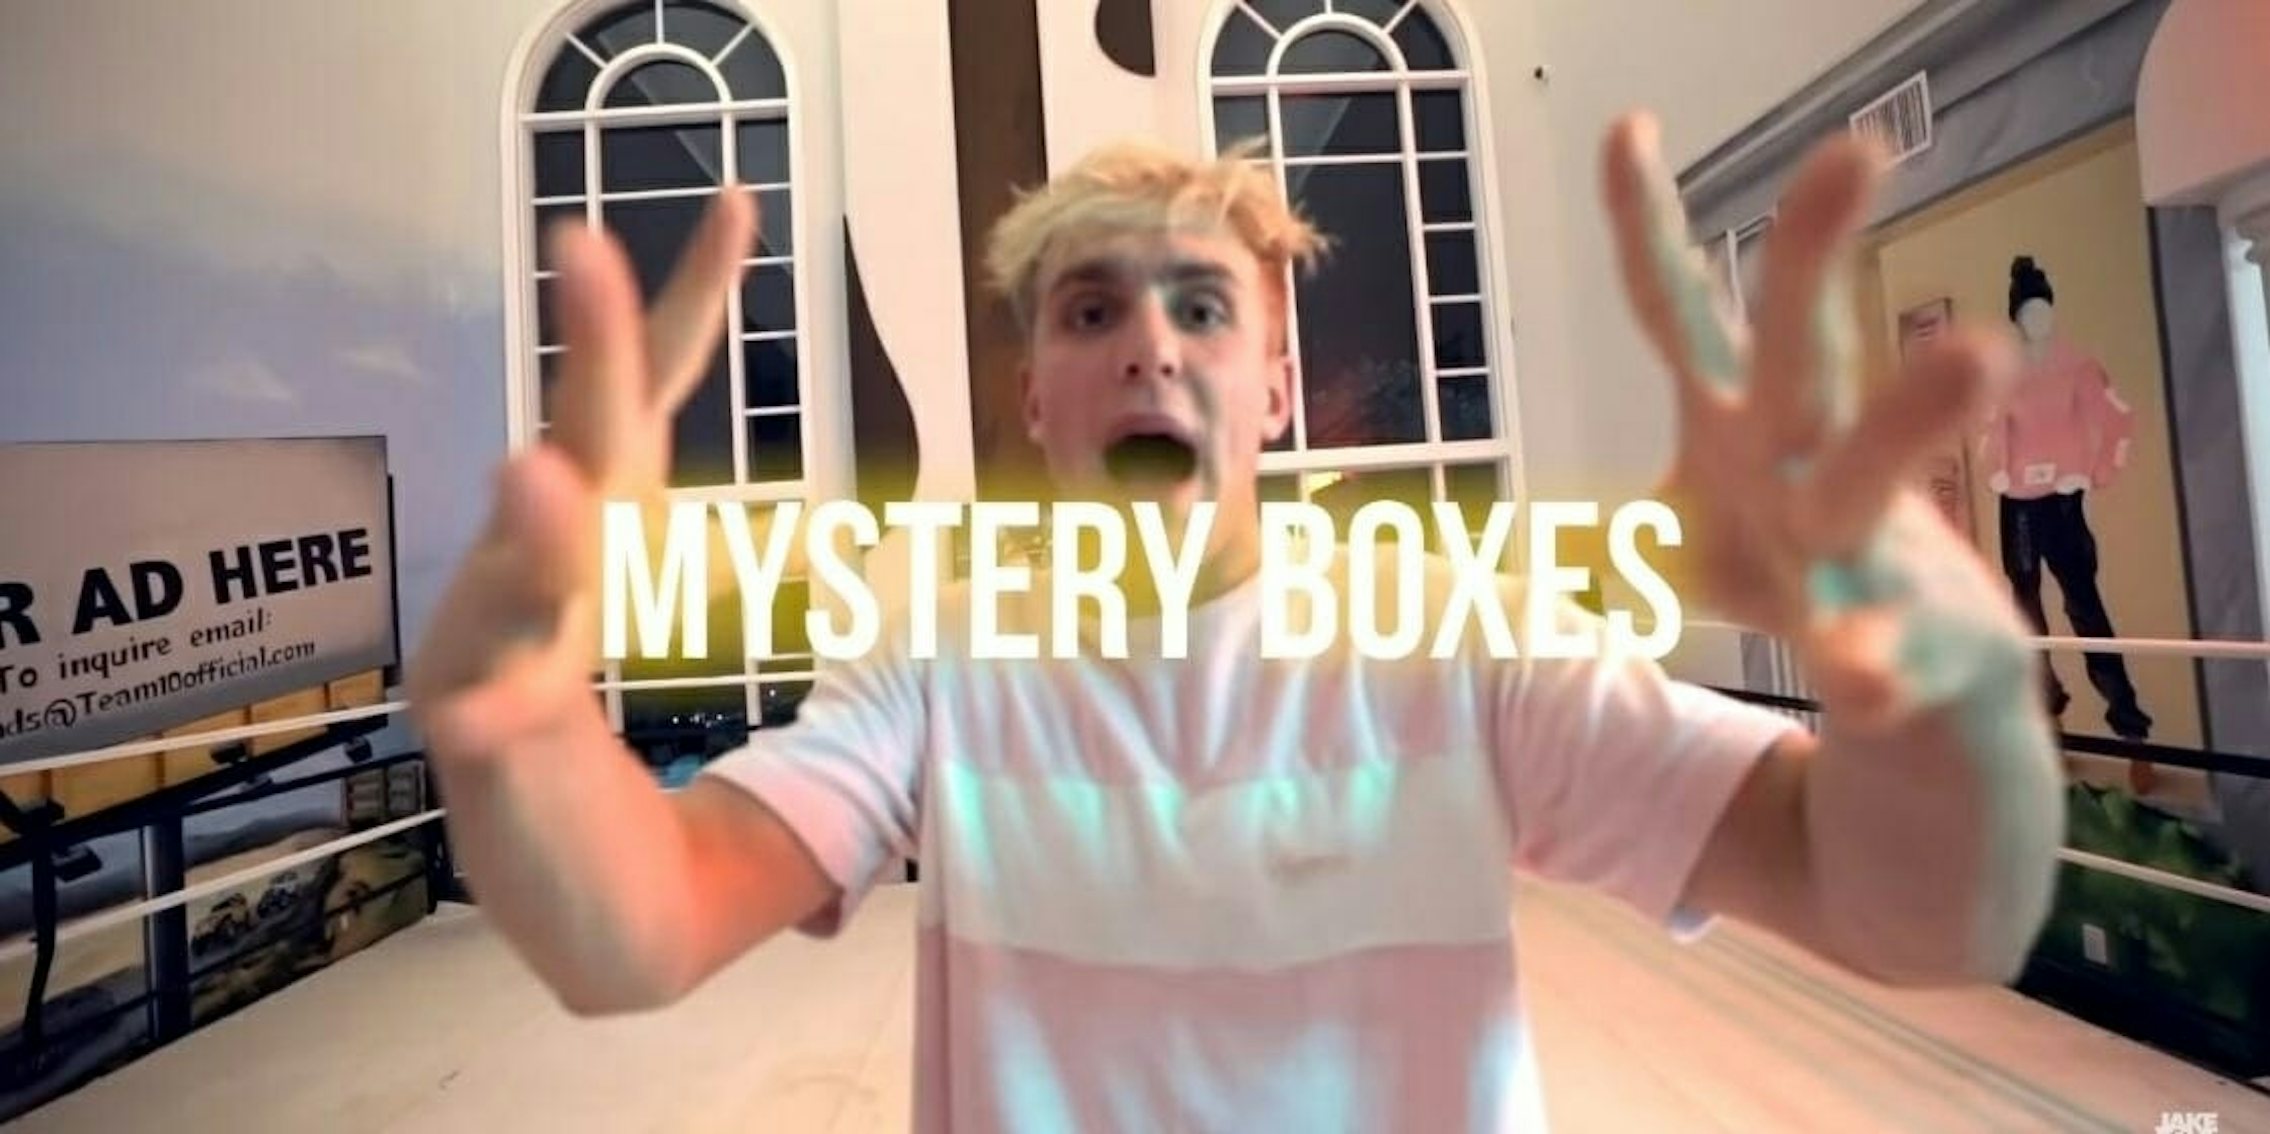 Jake Paul and other influencers are promoting 'mystery boxes' to